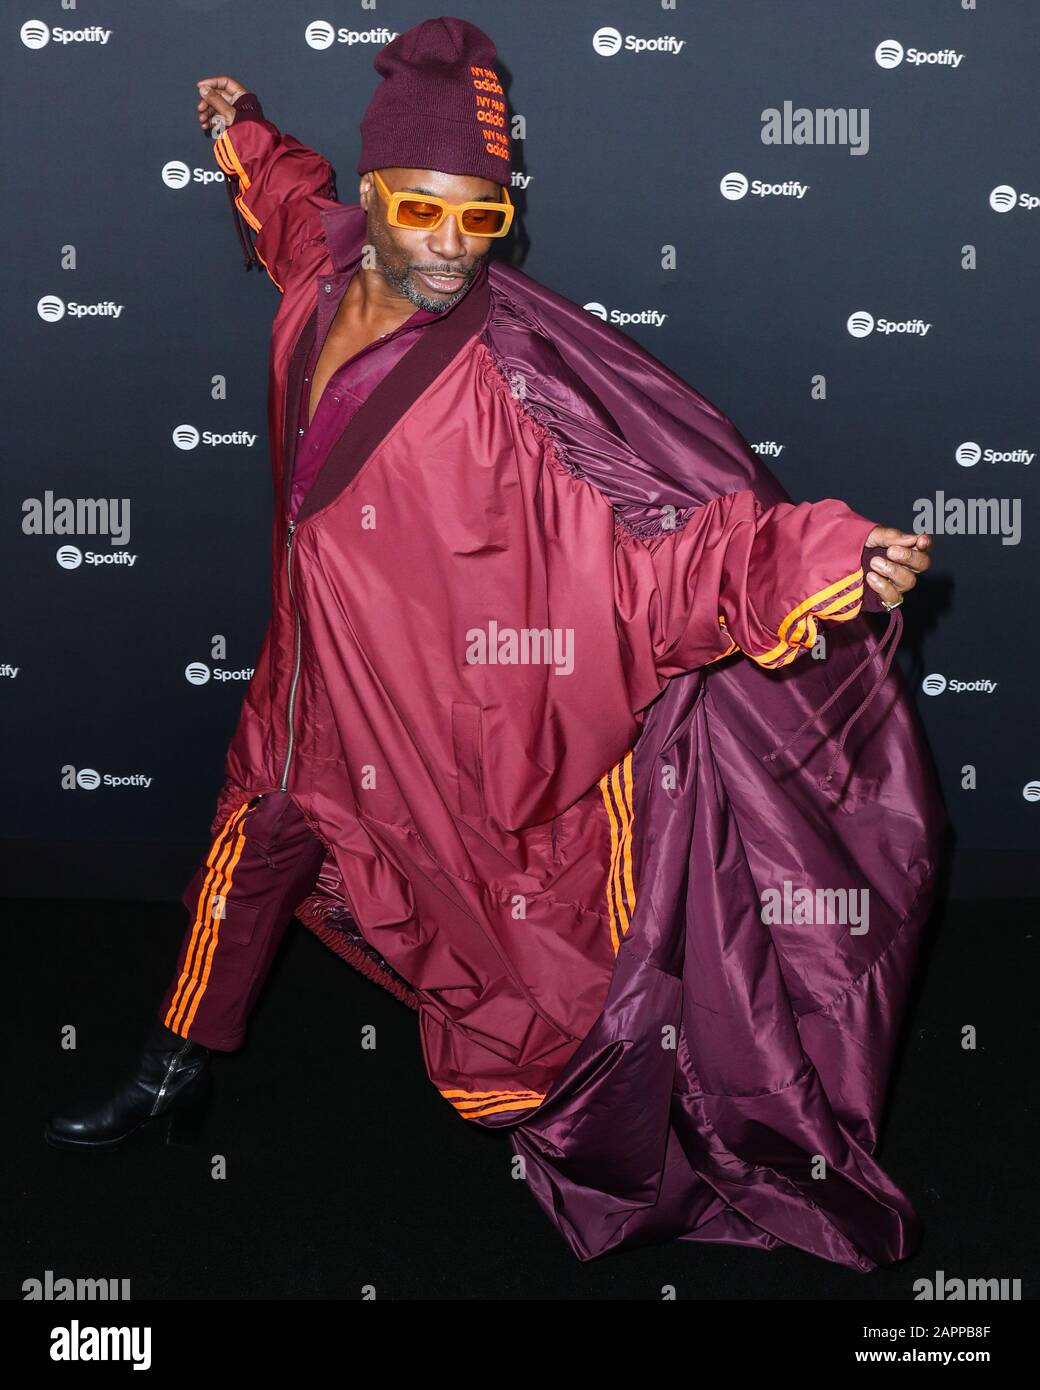 WEST HOLLYWOOD, LOS ANGELES, CALIFORNIA, USA - JANUARY 23: Billy Porter  wearing Adidas x Ivy Park arrives at the Spotify Best New Artist 2020 Party  held at The Lot Studios on January